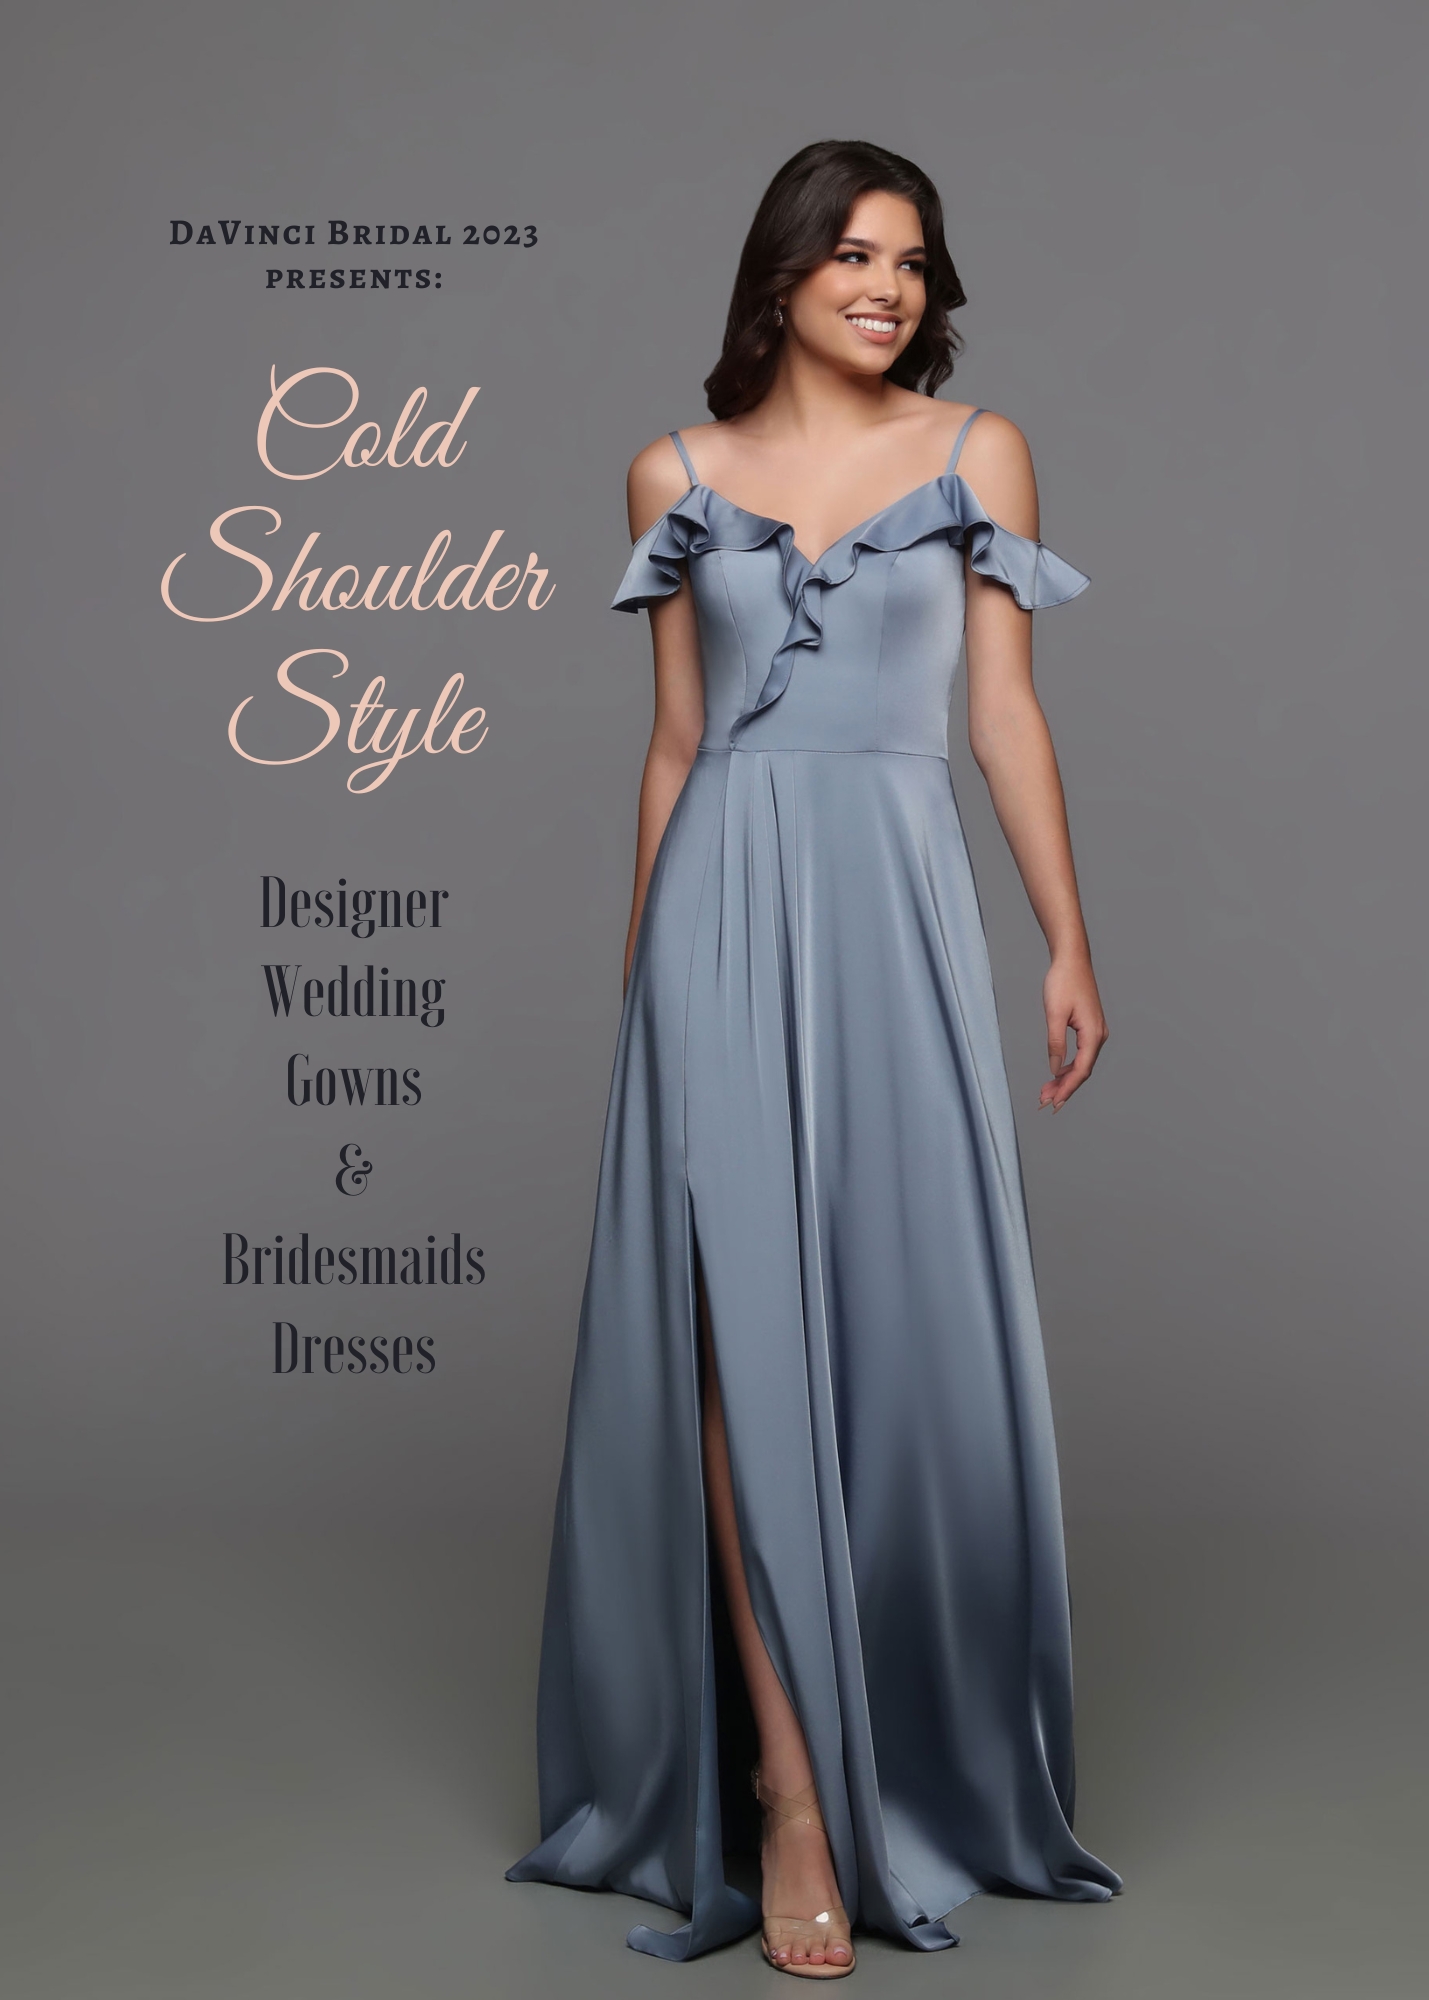 Bridesmaids Dresses in 2022: The hot looks we're loving - Pilón Kitchen